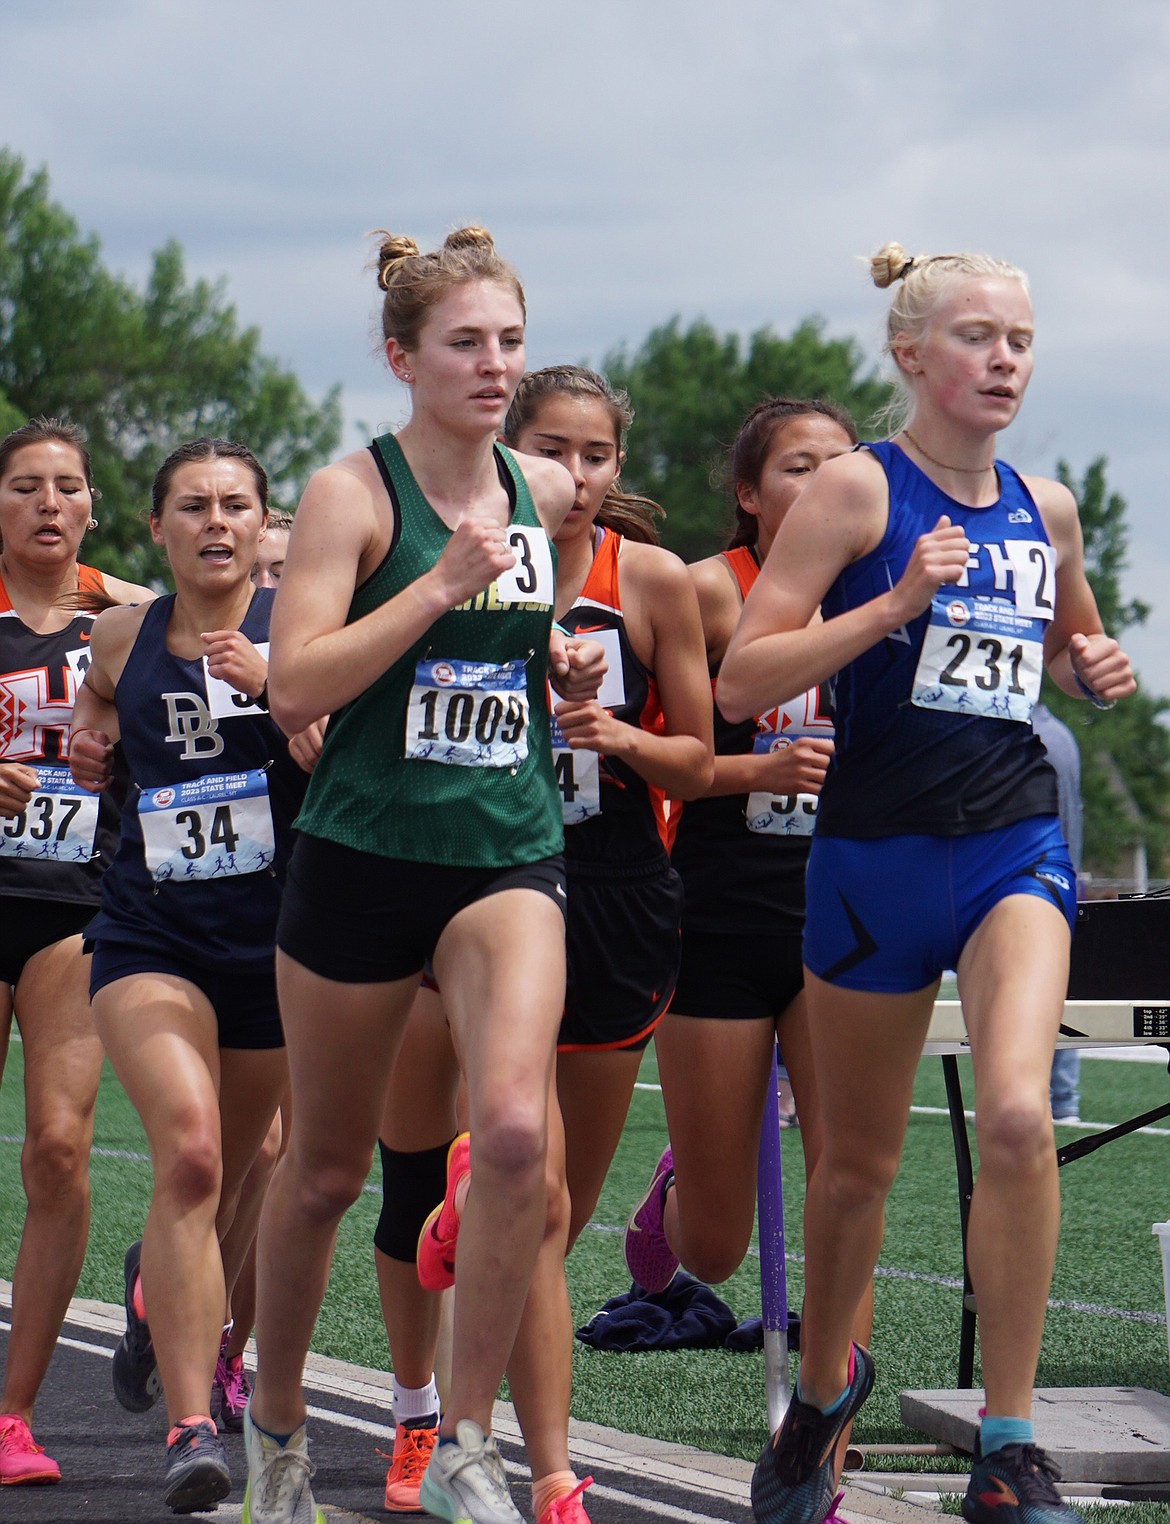 Whitefish Junior Maeve Ingelfinger (left) competes with Senior Siri Erickson from Columbia Falls in the woman’s 1600 meter run at the Class A State Track & Field Meet. Ingelfinger earned a personal best time of 5:16.76 and third position on the podium. (Matt Weller photo)